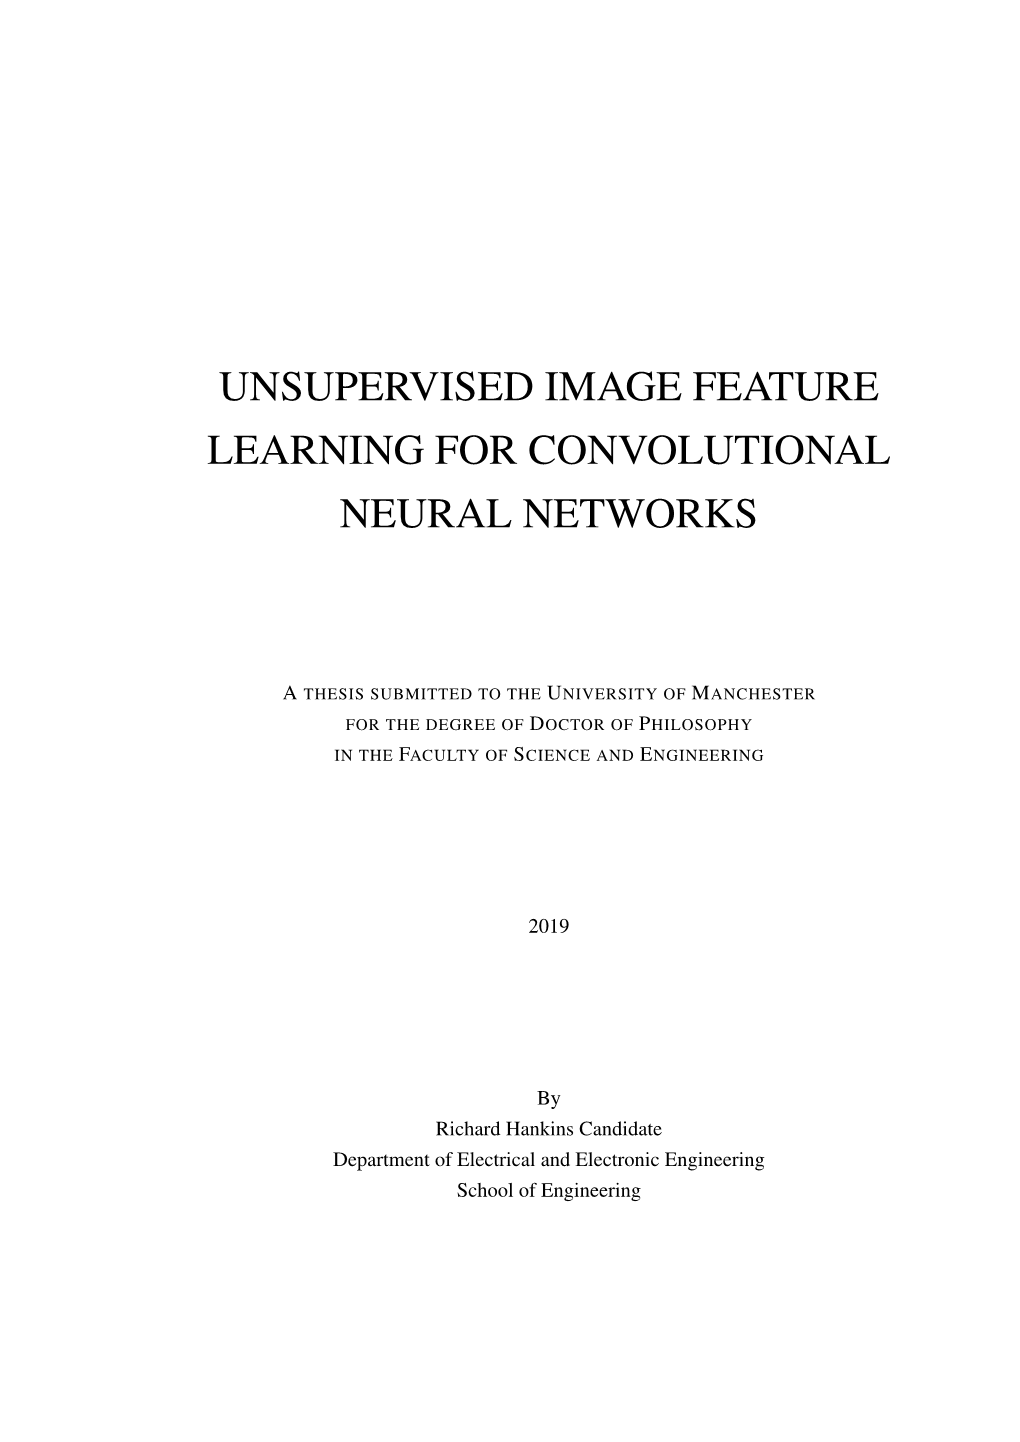 Unsupervised Image Feature Learning for Convolutional Neural Networks